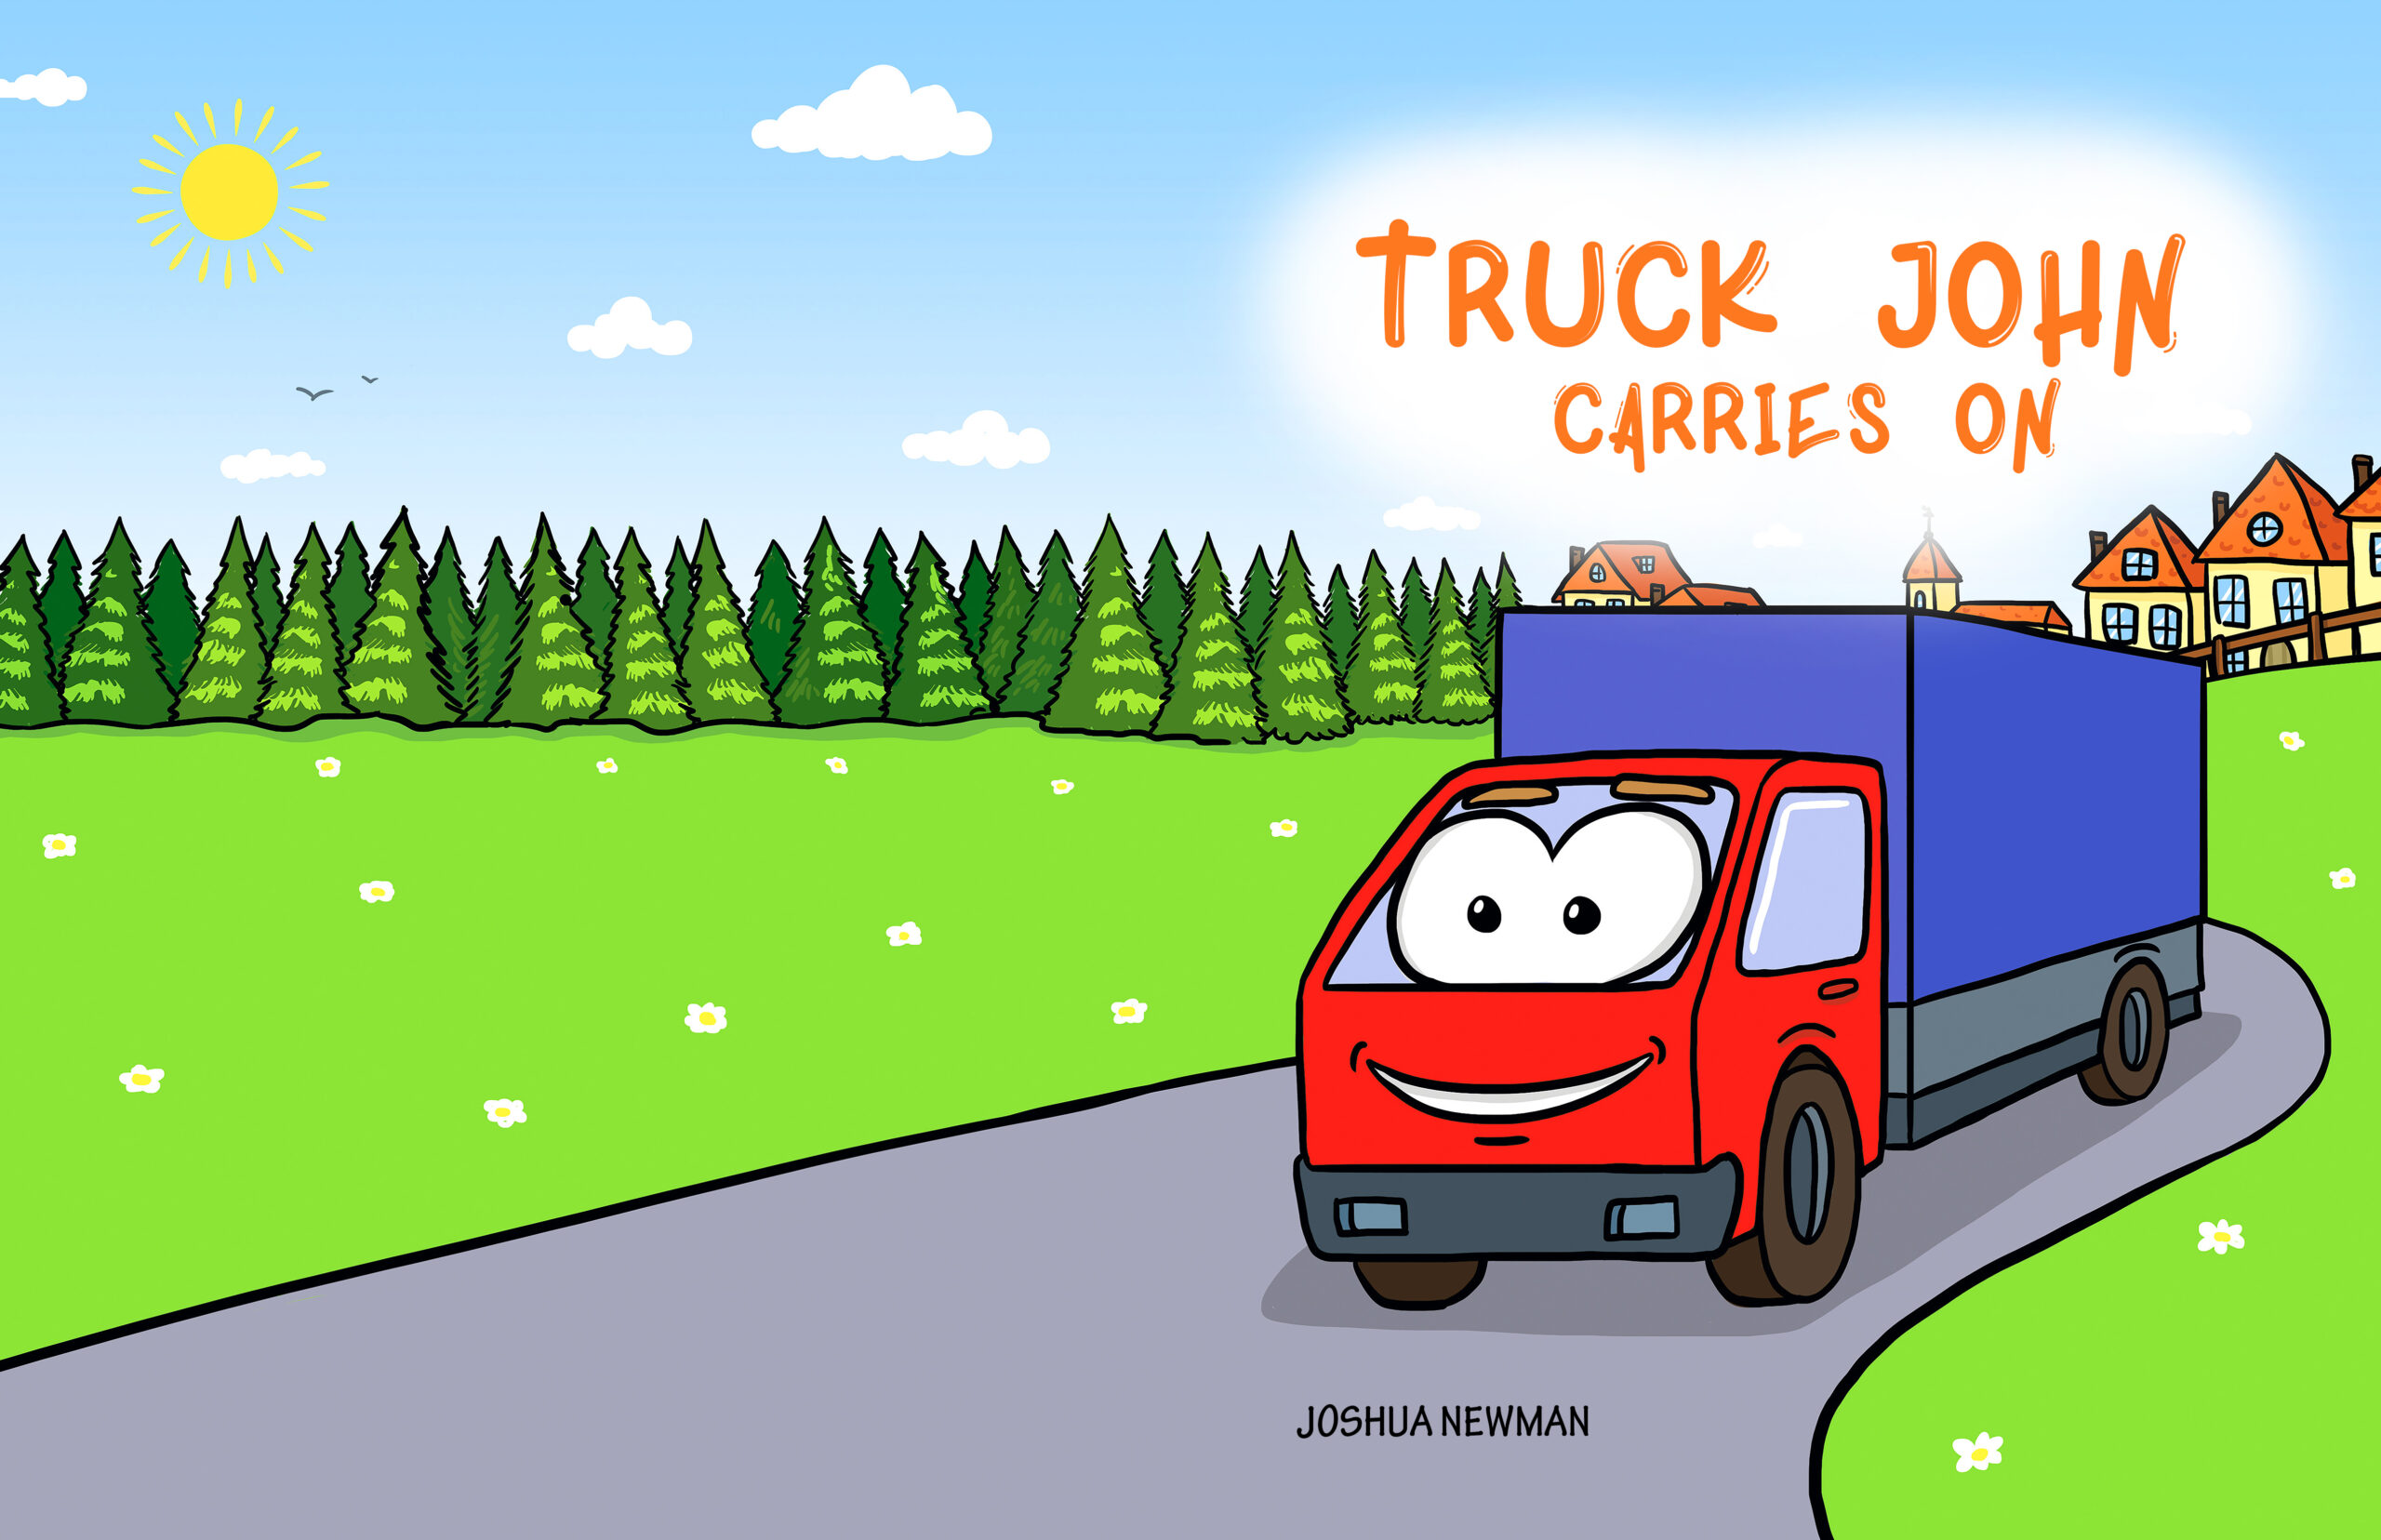 FREE: Truck John Carries On by Joshua Newman